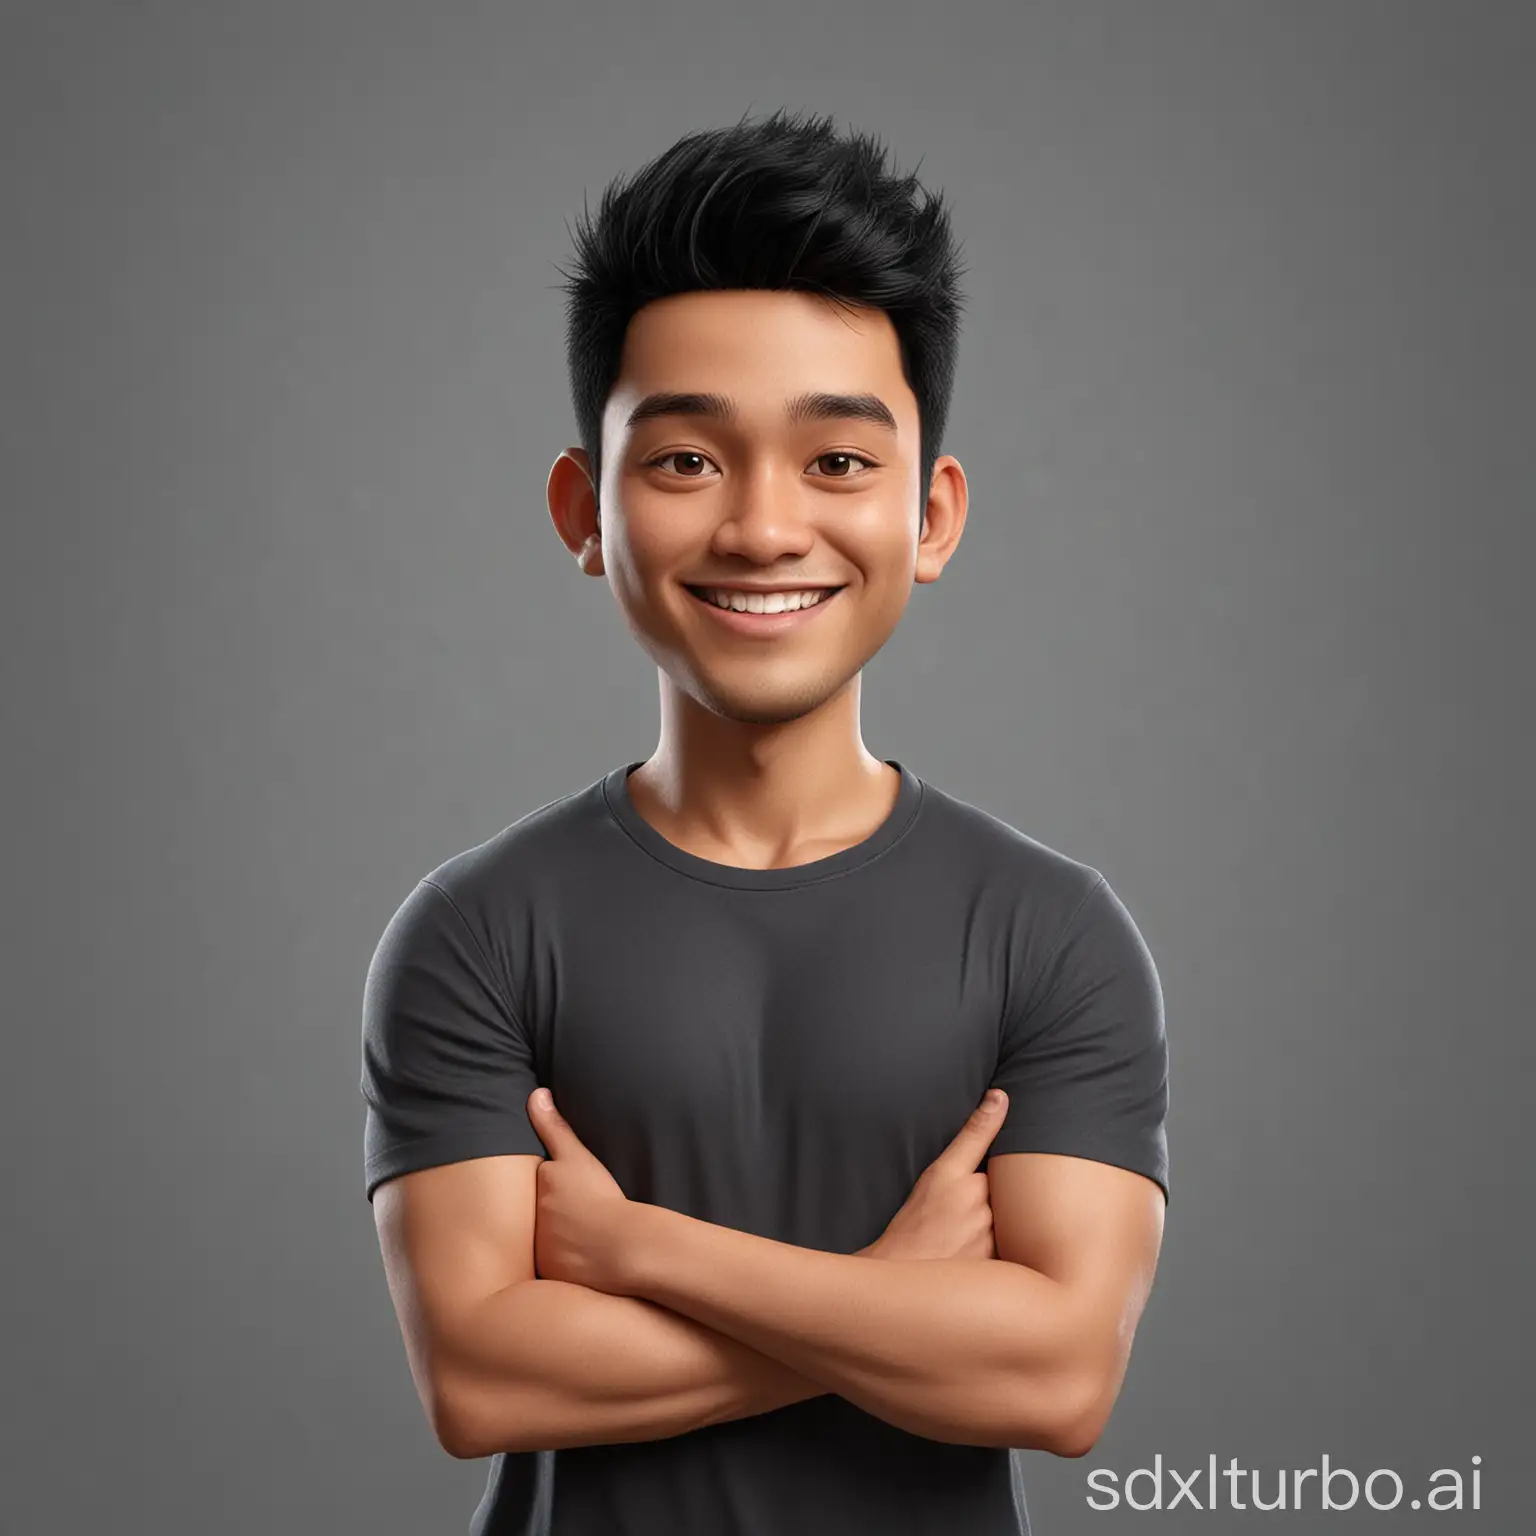 Smiling-Indonesian-Man-in-3D-Cartoon-Style-Ideal-Body-and-Black-TShirt-Portrait